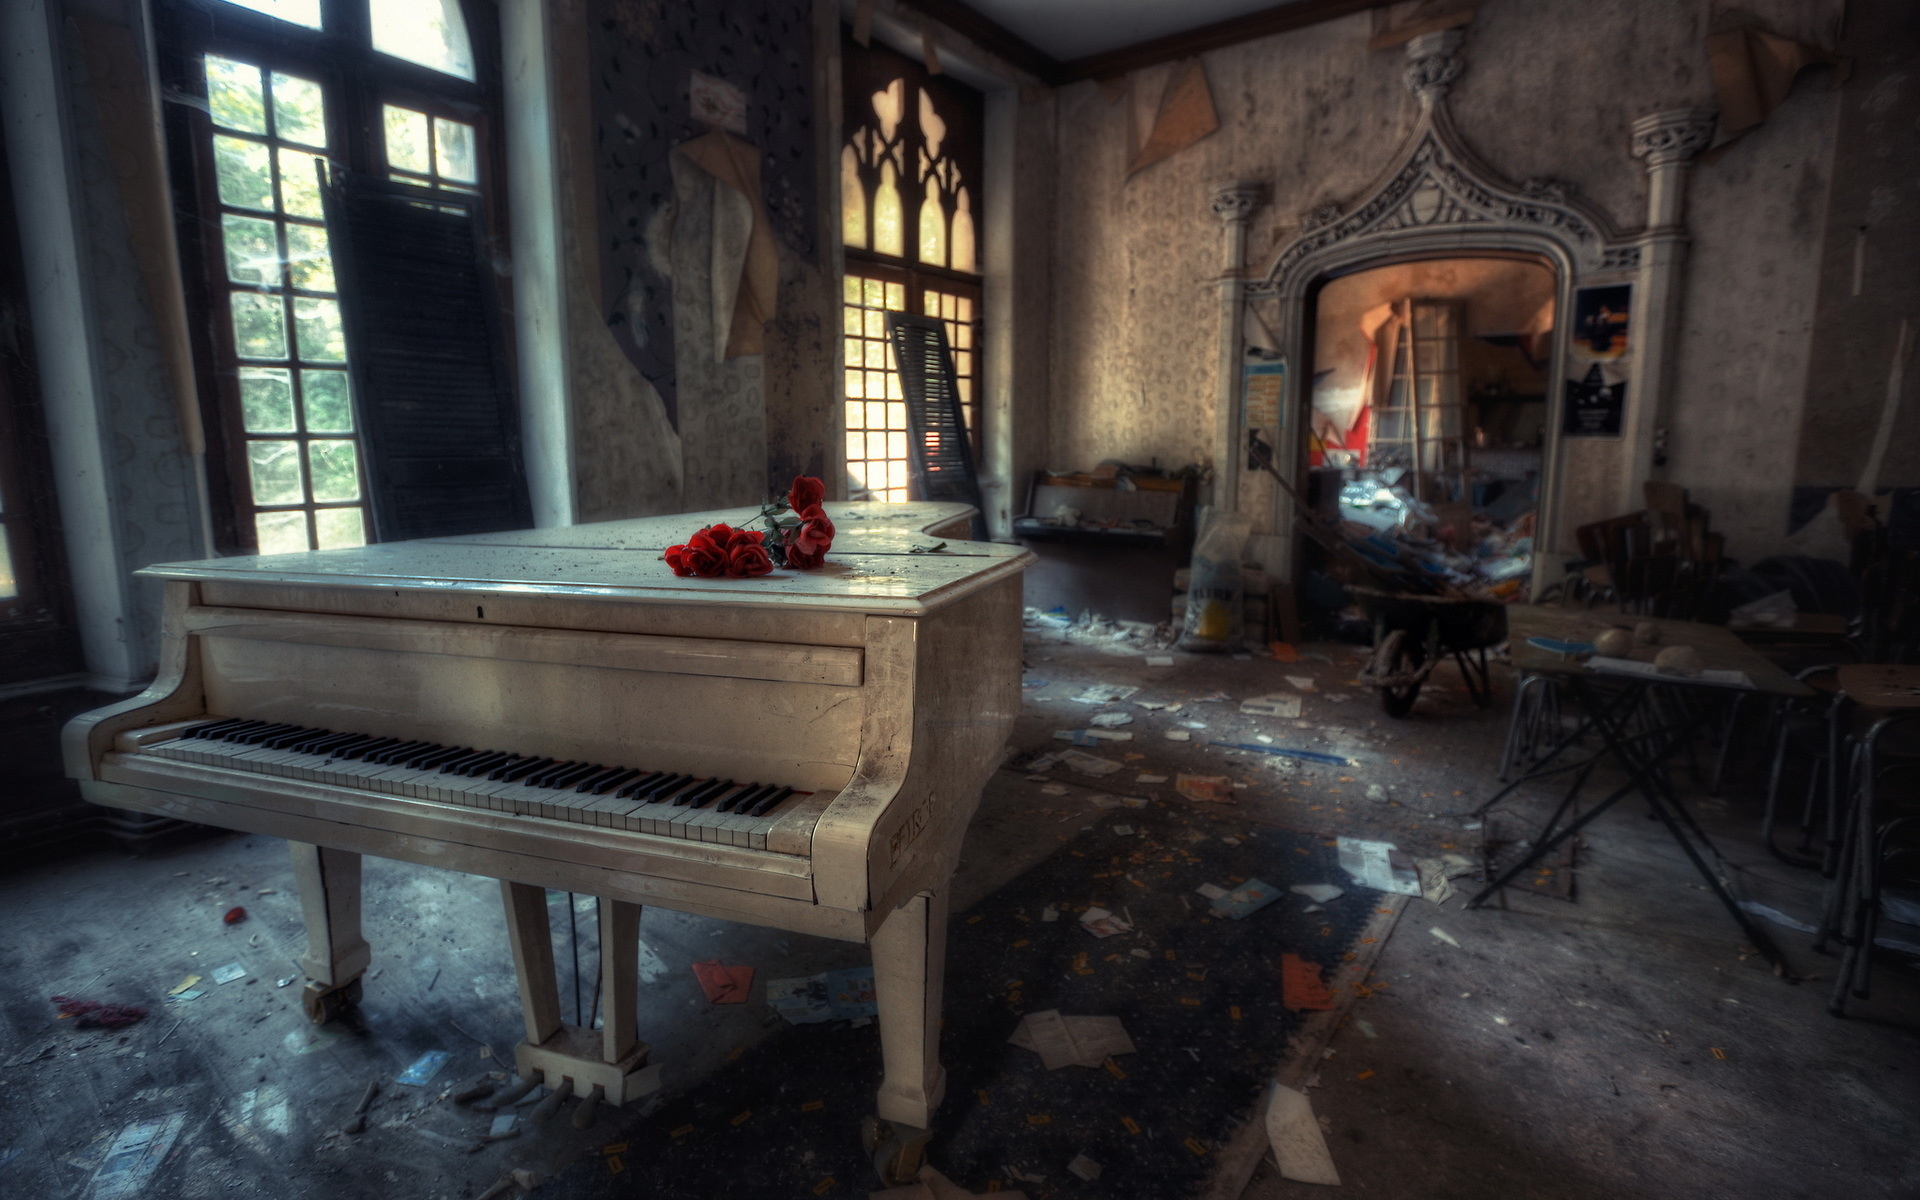 Grand Piano: Old room, Red roses, Musical instrument with a keyboard and three pedals. 1920x1200 HD Wallpaper.